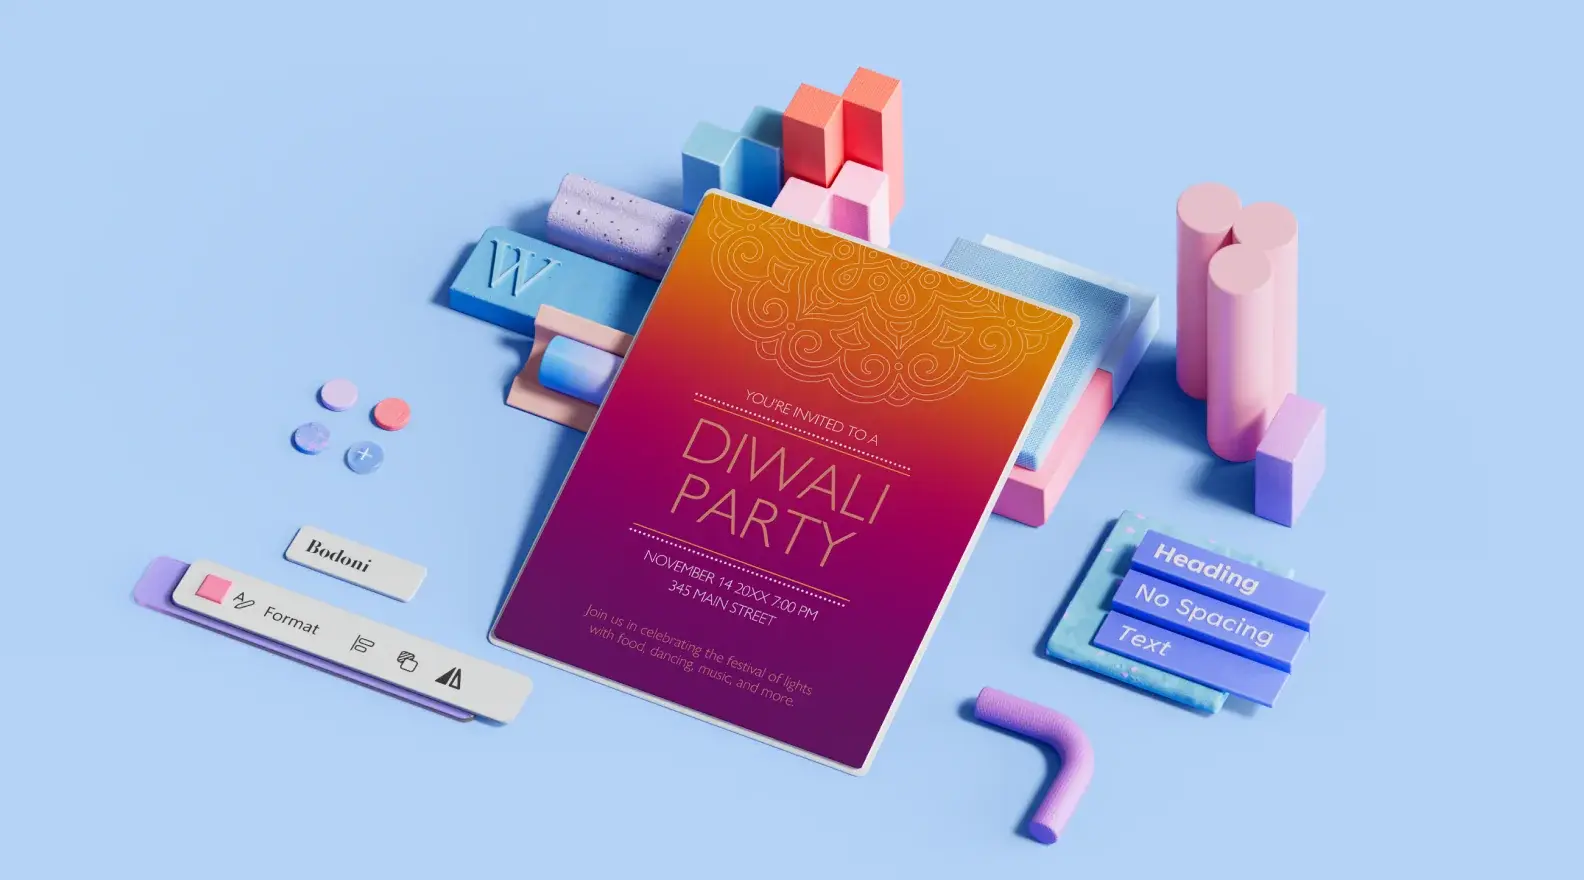 Diwali party event poster template surrounded by 3D design elements